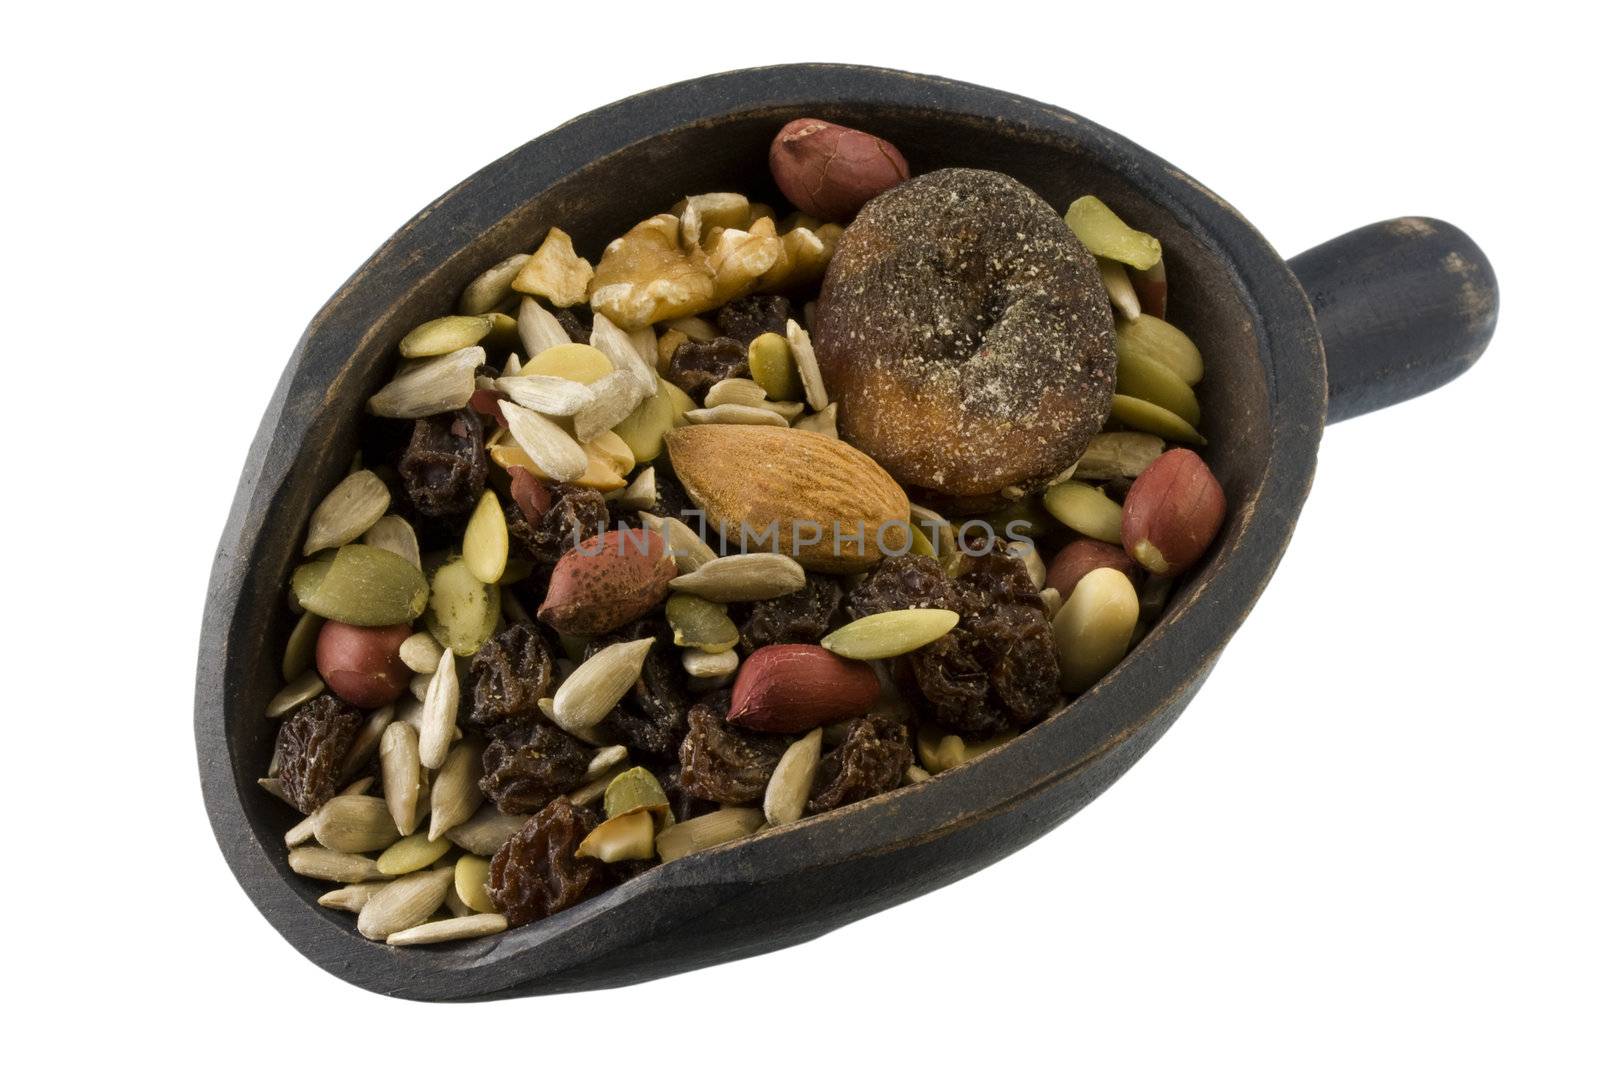 a rustic, wooden scoop of trail mix including sunfkower, pumpkin seeds, peanuts, walnuts, almonds, raisins and figs; isolated with clipping path